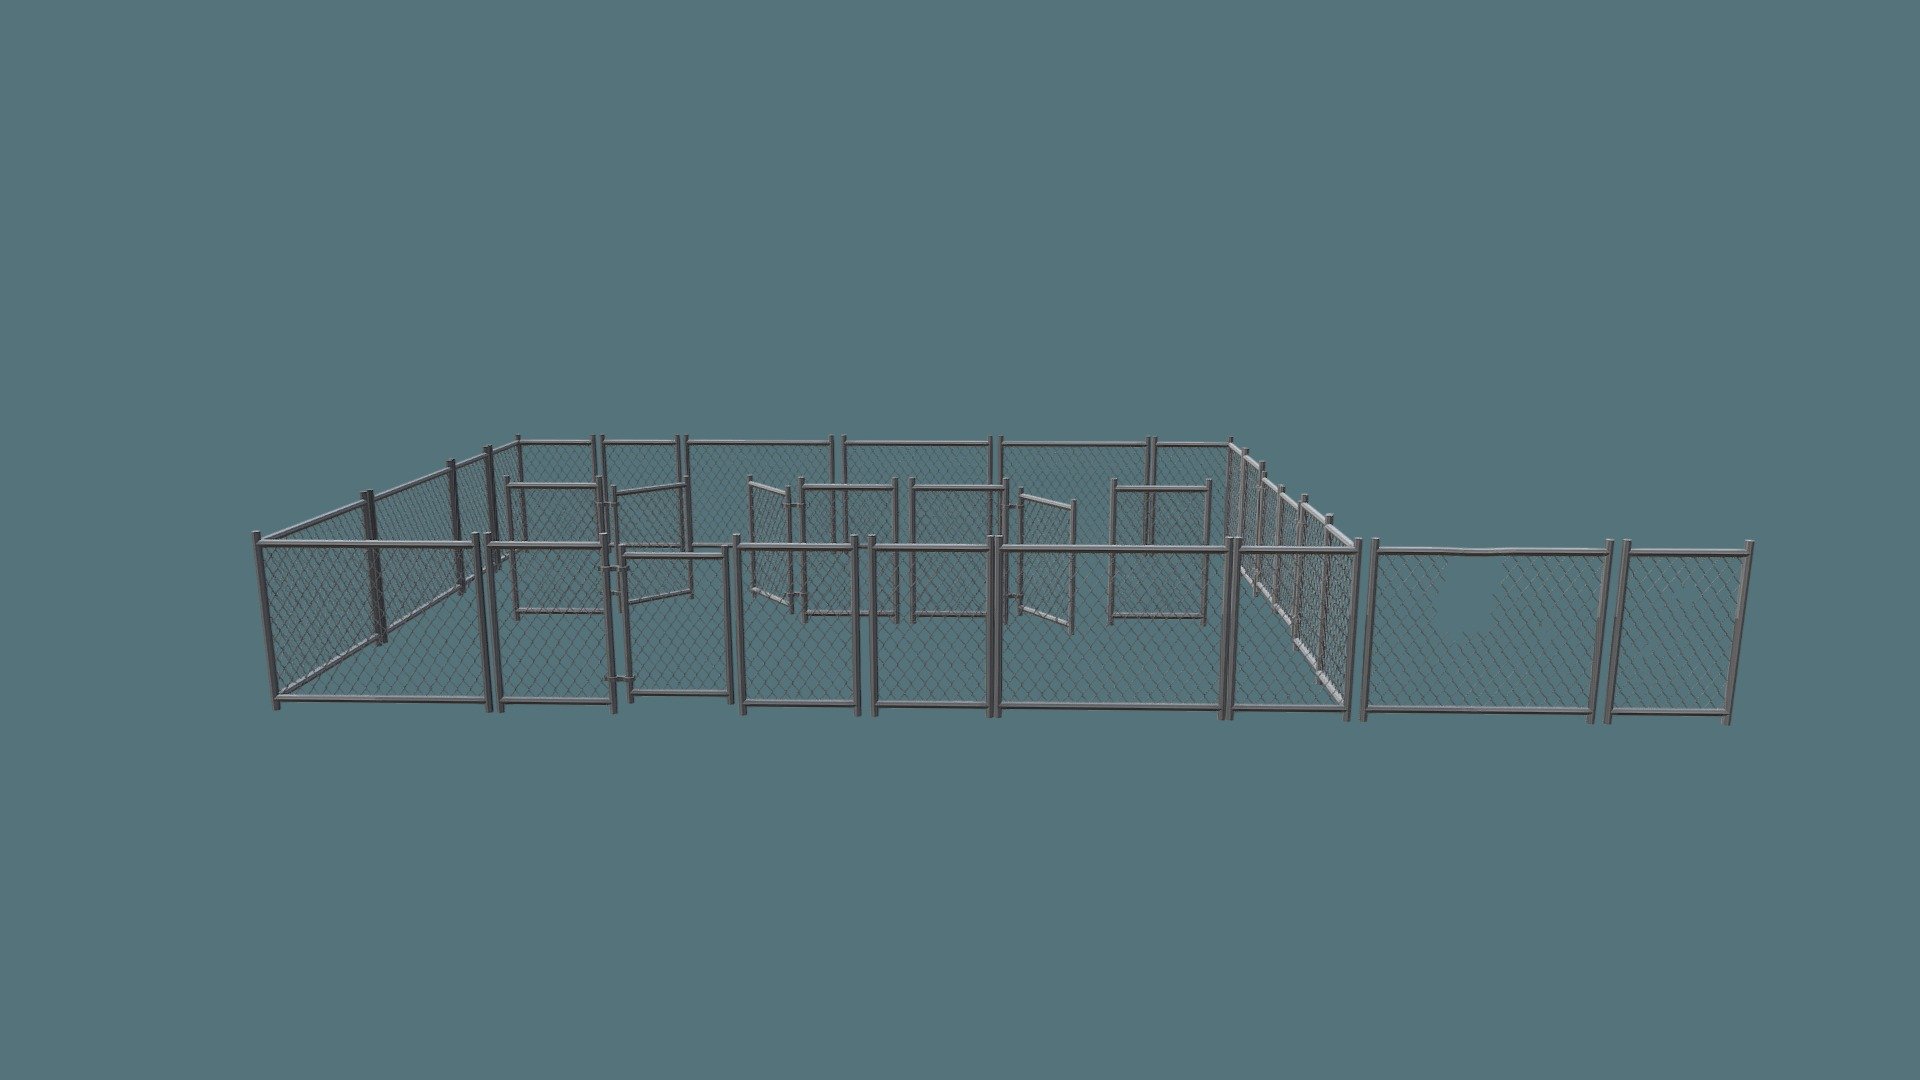 A variation of chainlink fences for setdressing. That includes gates, corners, and broken fences 3d model